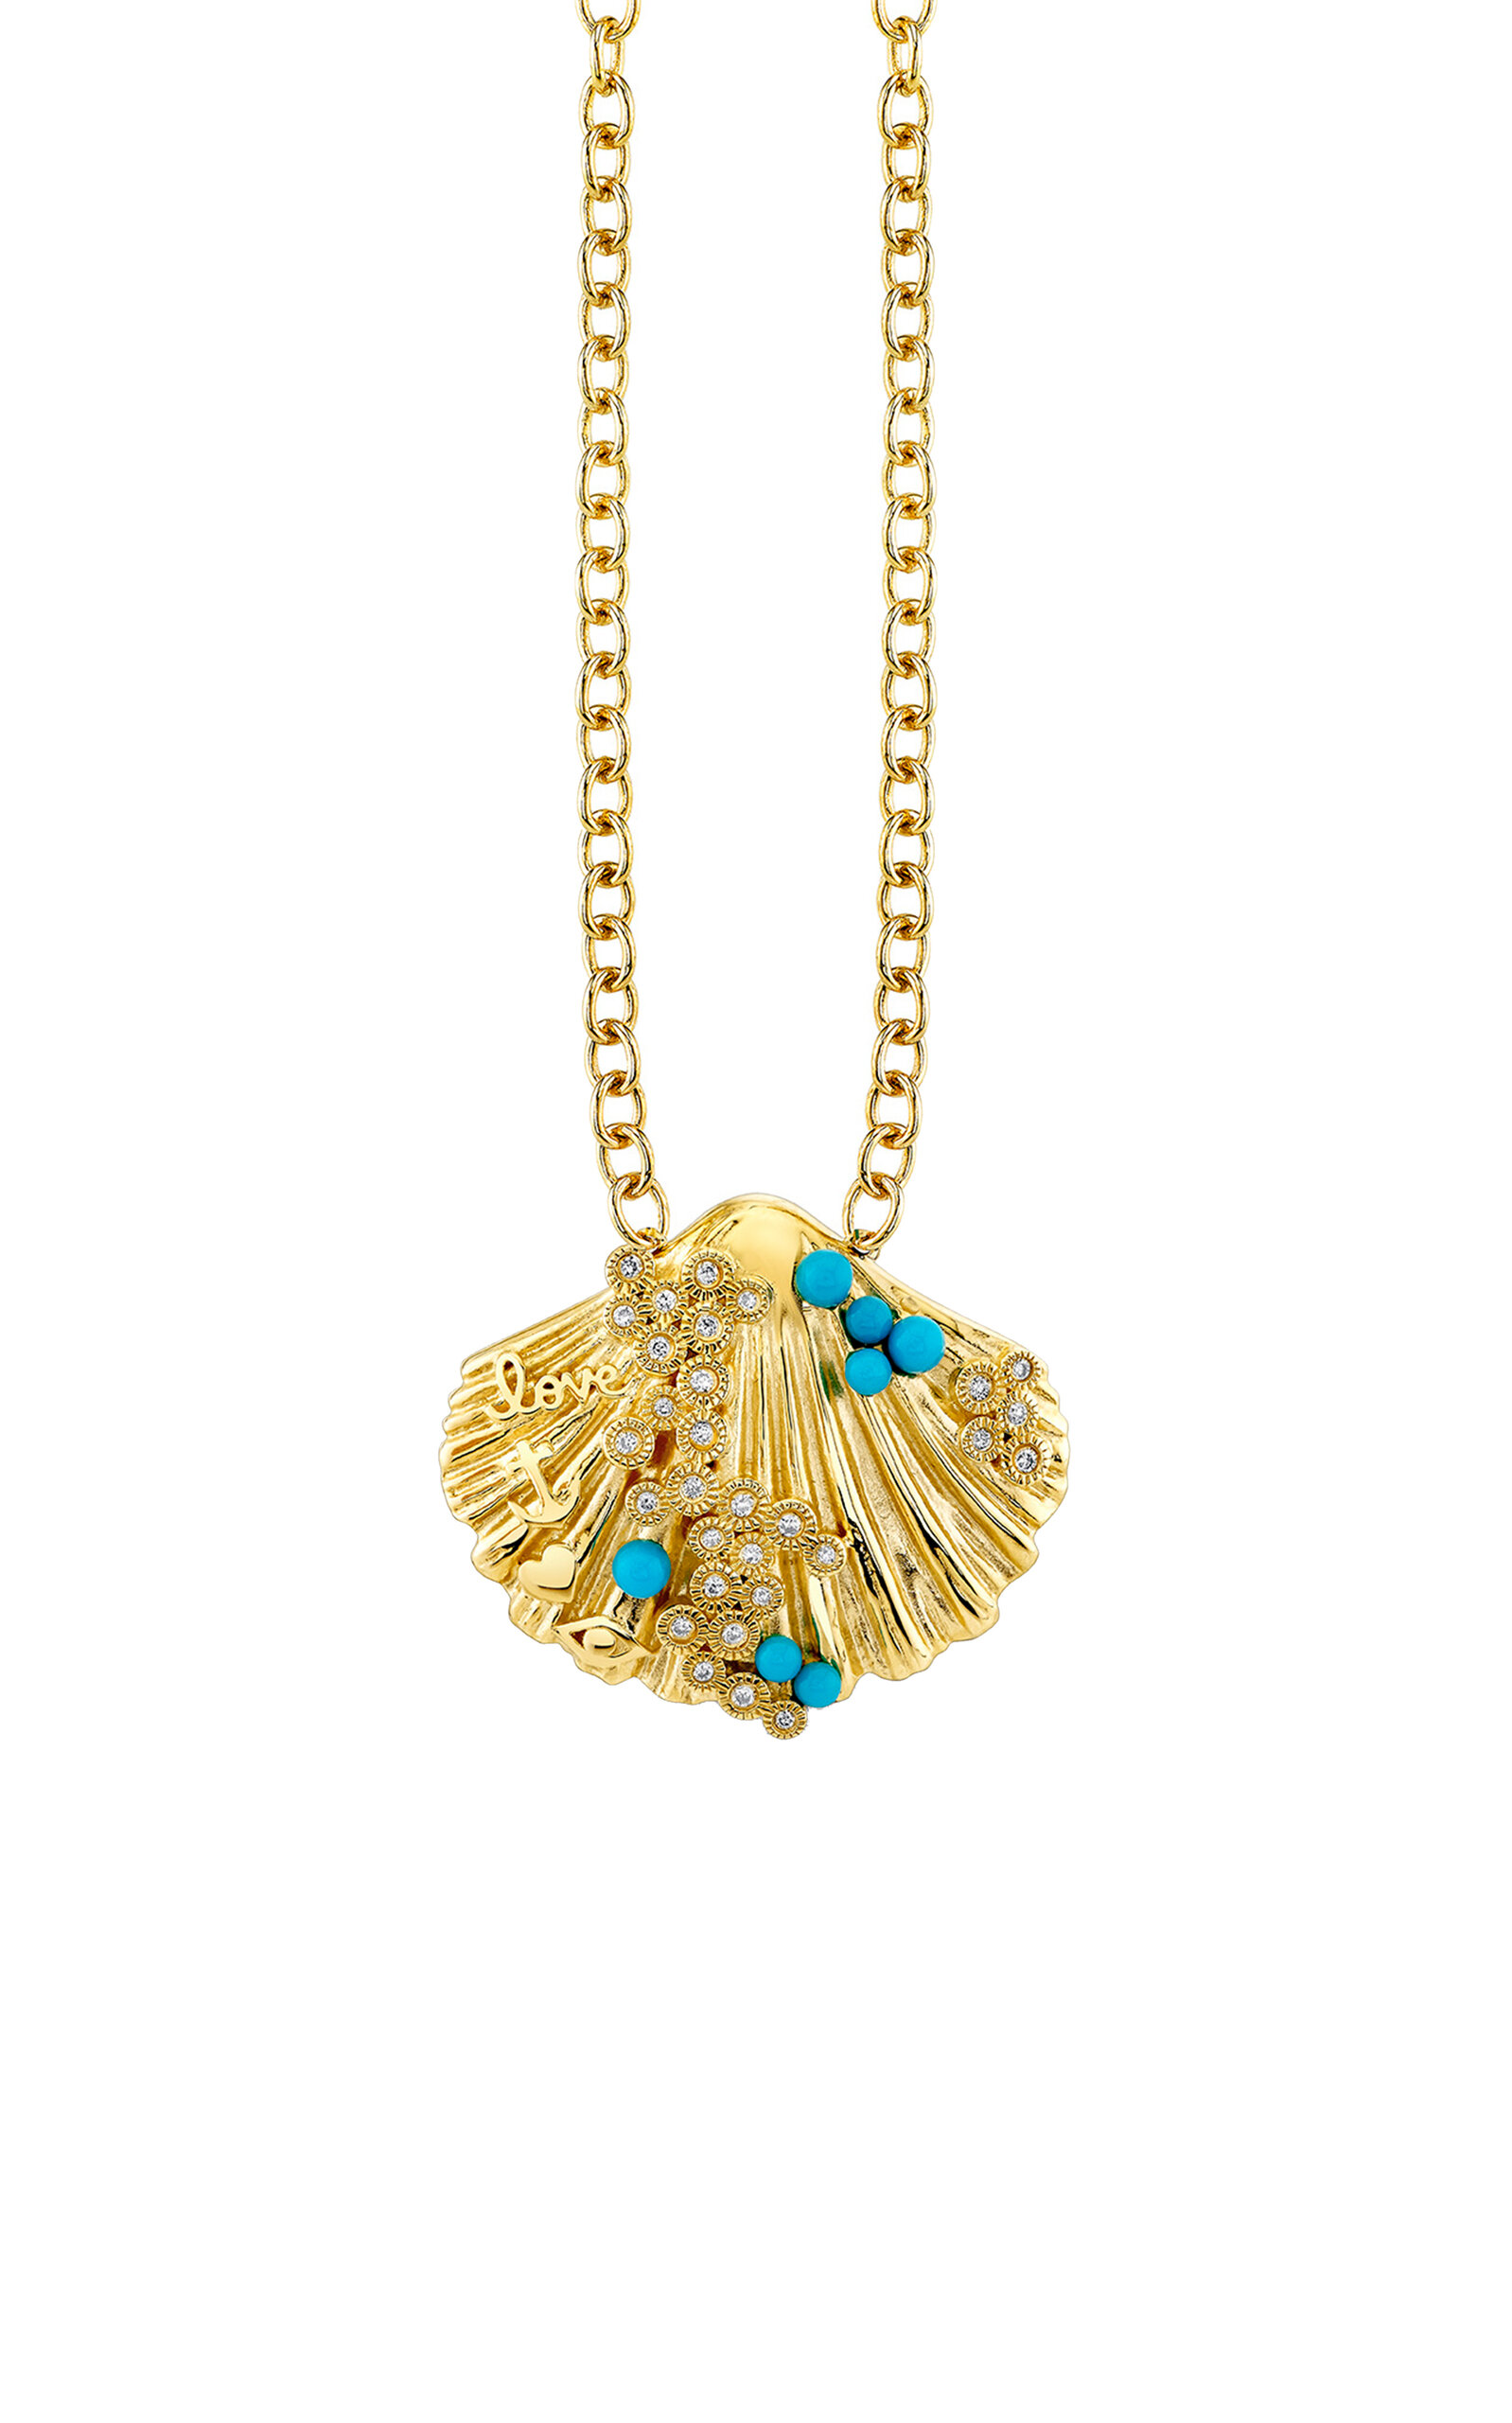 Shop Sydney Evan 14k Yellow Gold Large Scallop Shell Necklace